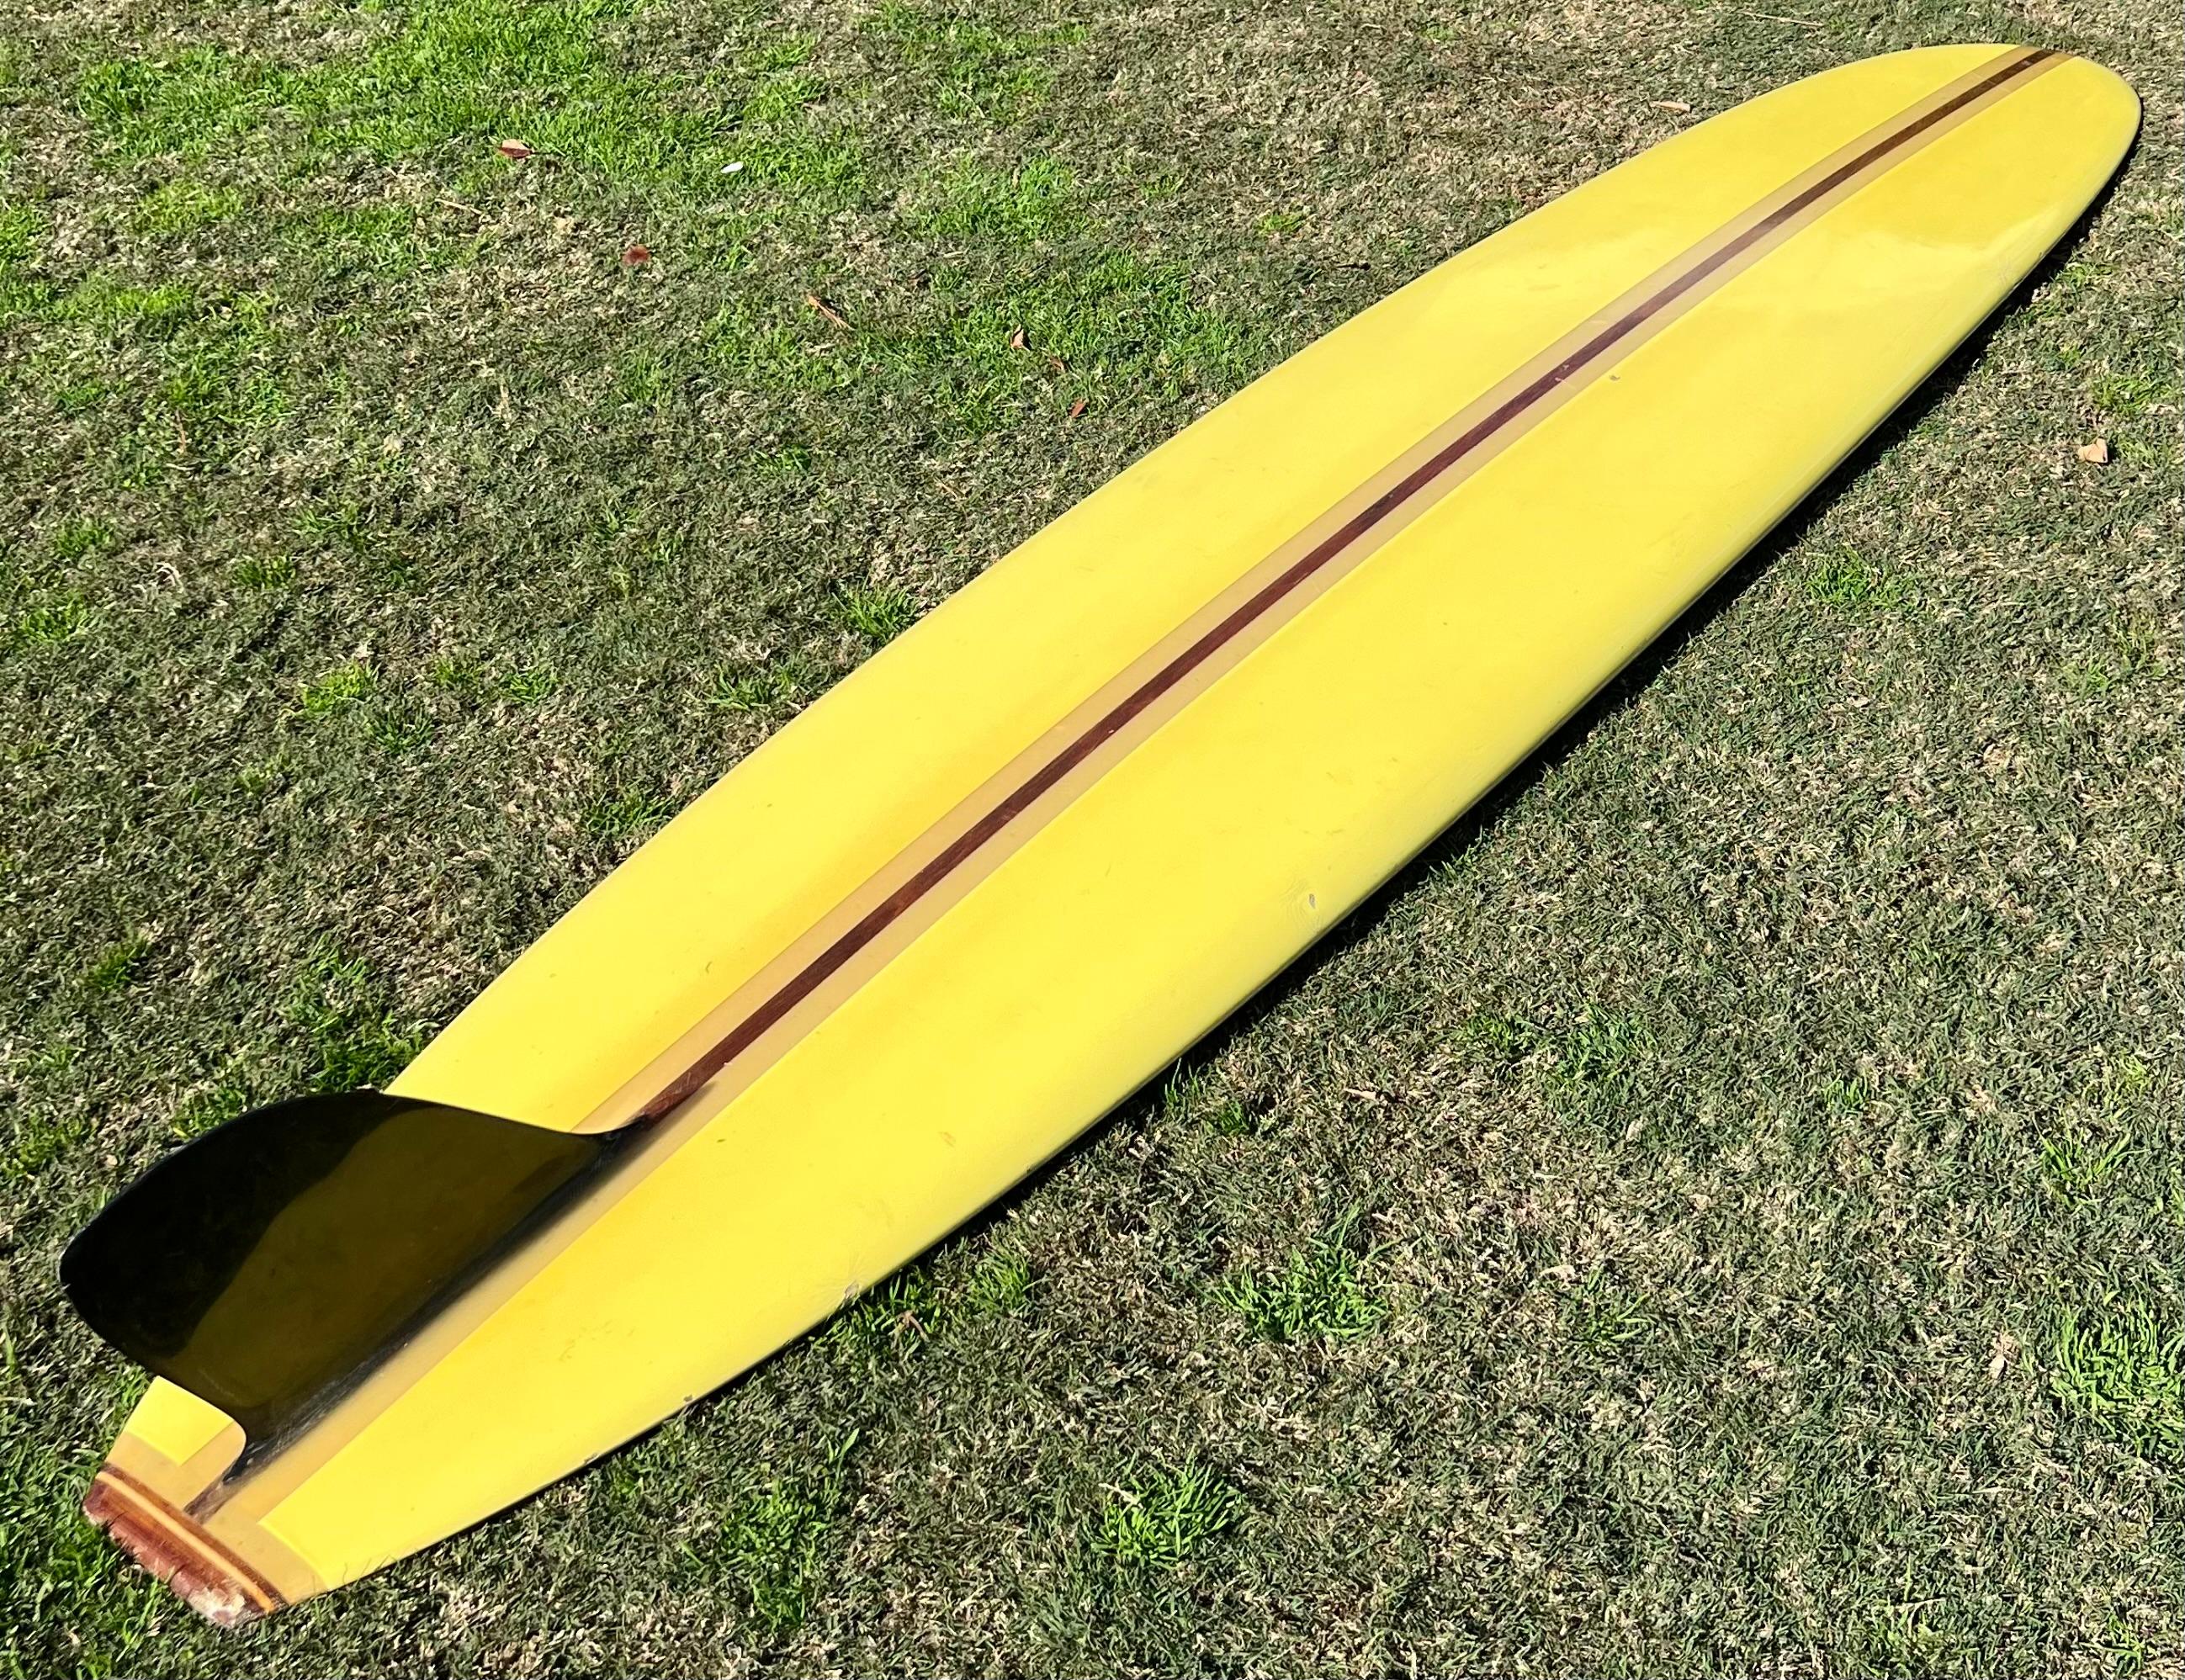 1960s Vintage Greg Noll custom longboard made in the mid 1960s. Features vibrant yellow pigment with Greg Noll atomic logo. Single redwood strigner with black single fin and 3-piece wood tailblock. All original condition. Made under the revered Greg